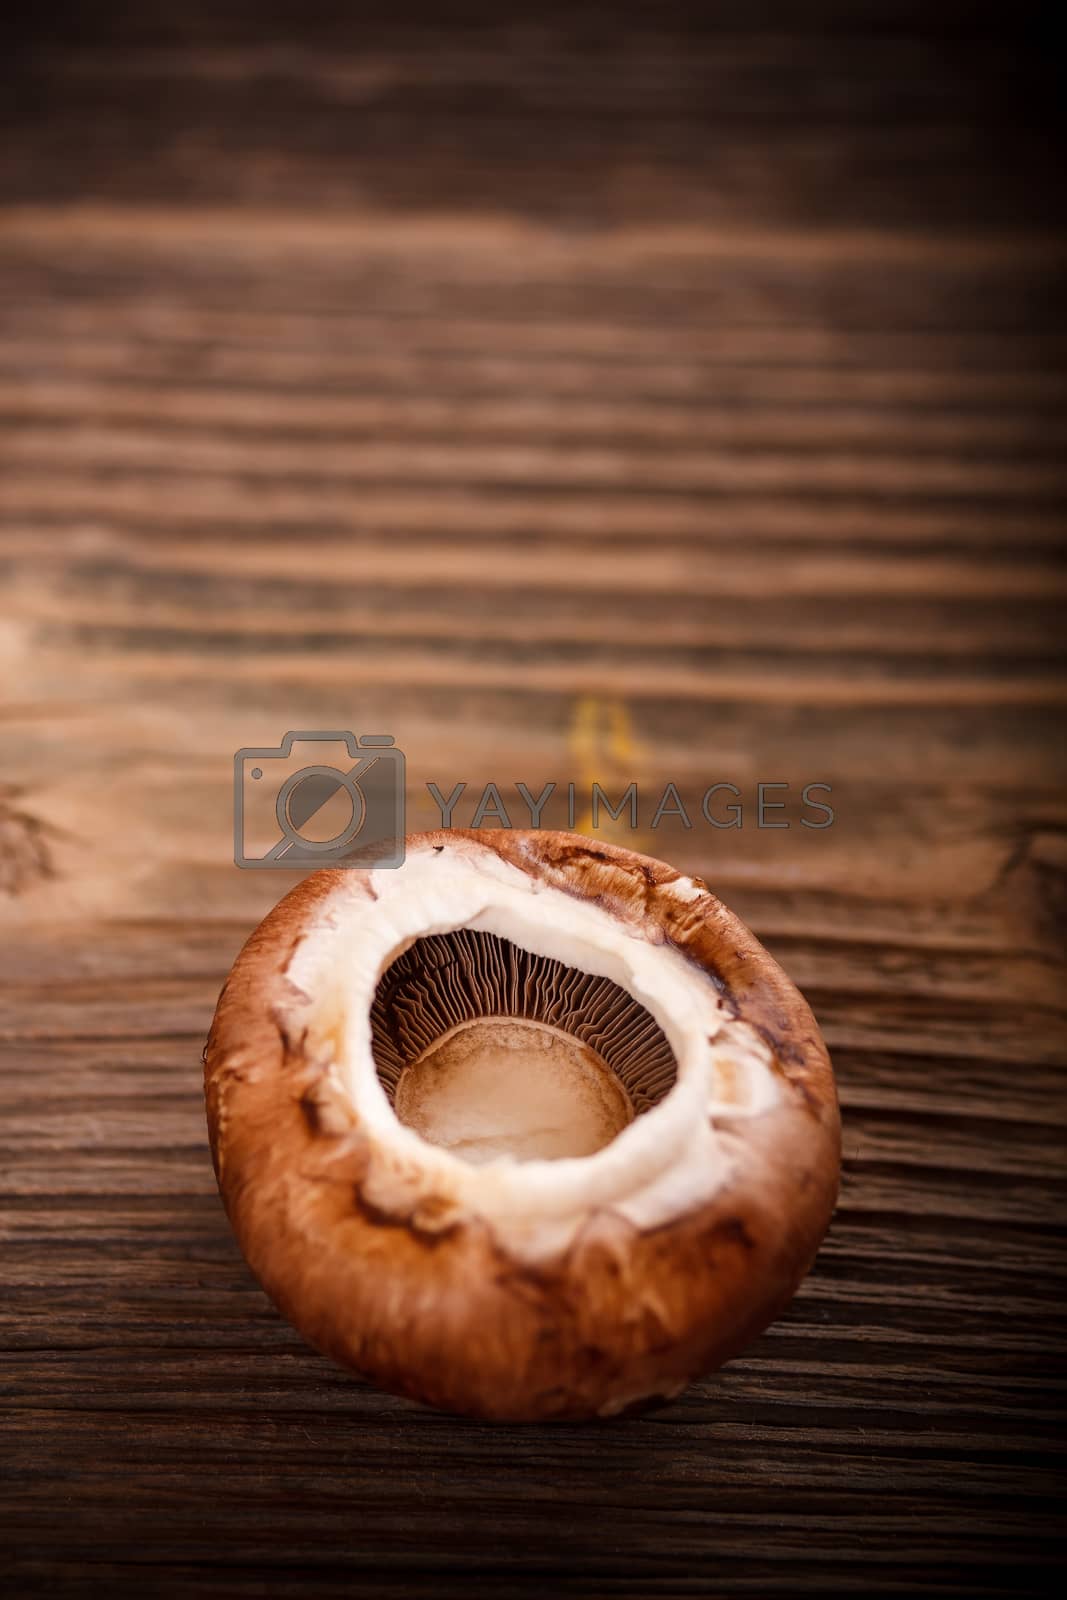 Royalty free image of Brown mushroom by grafvision